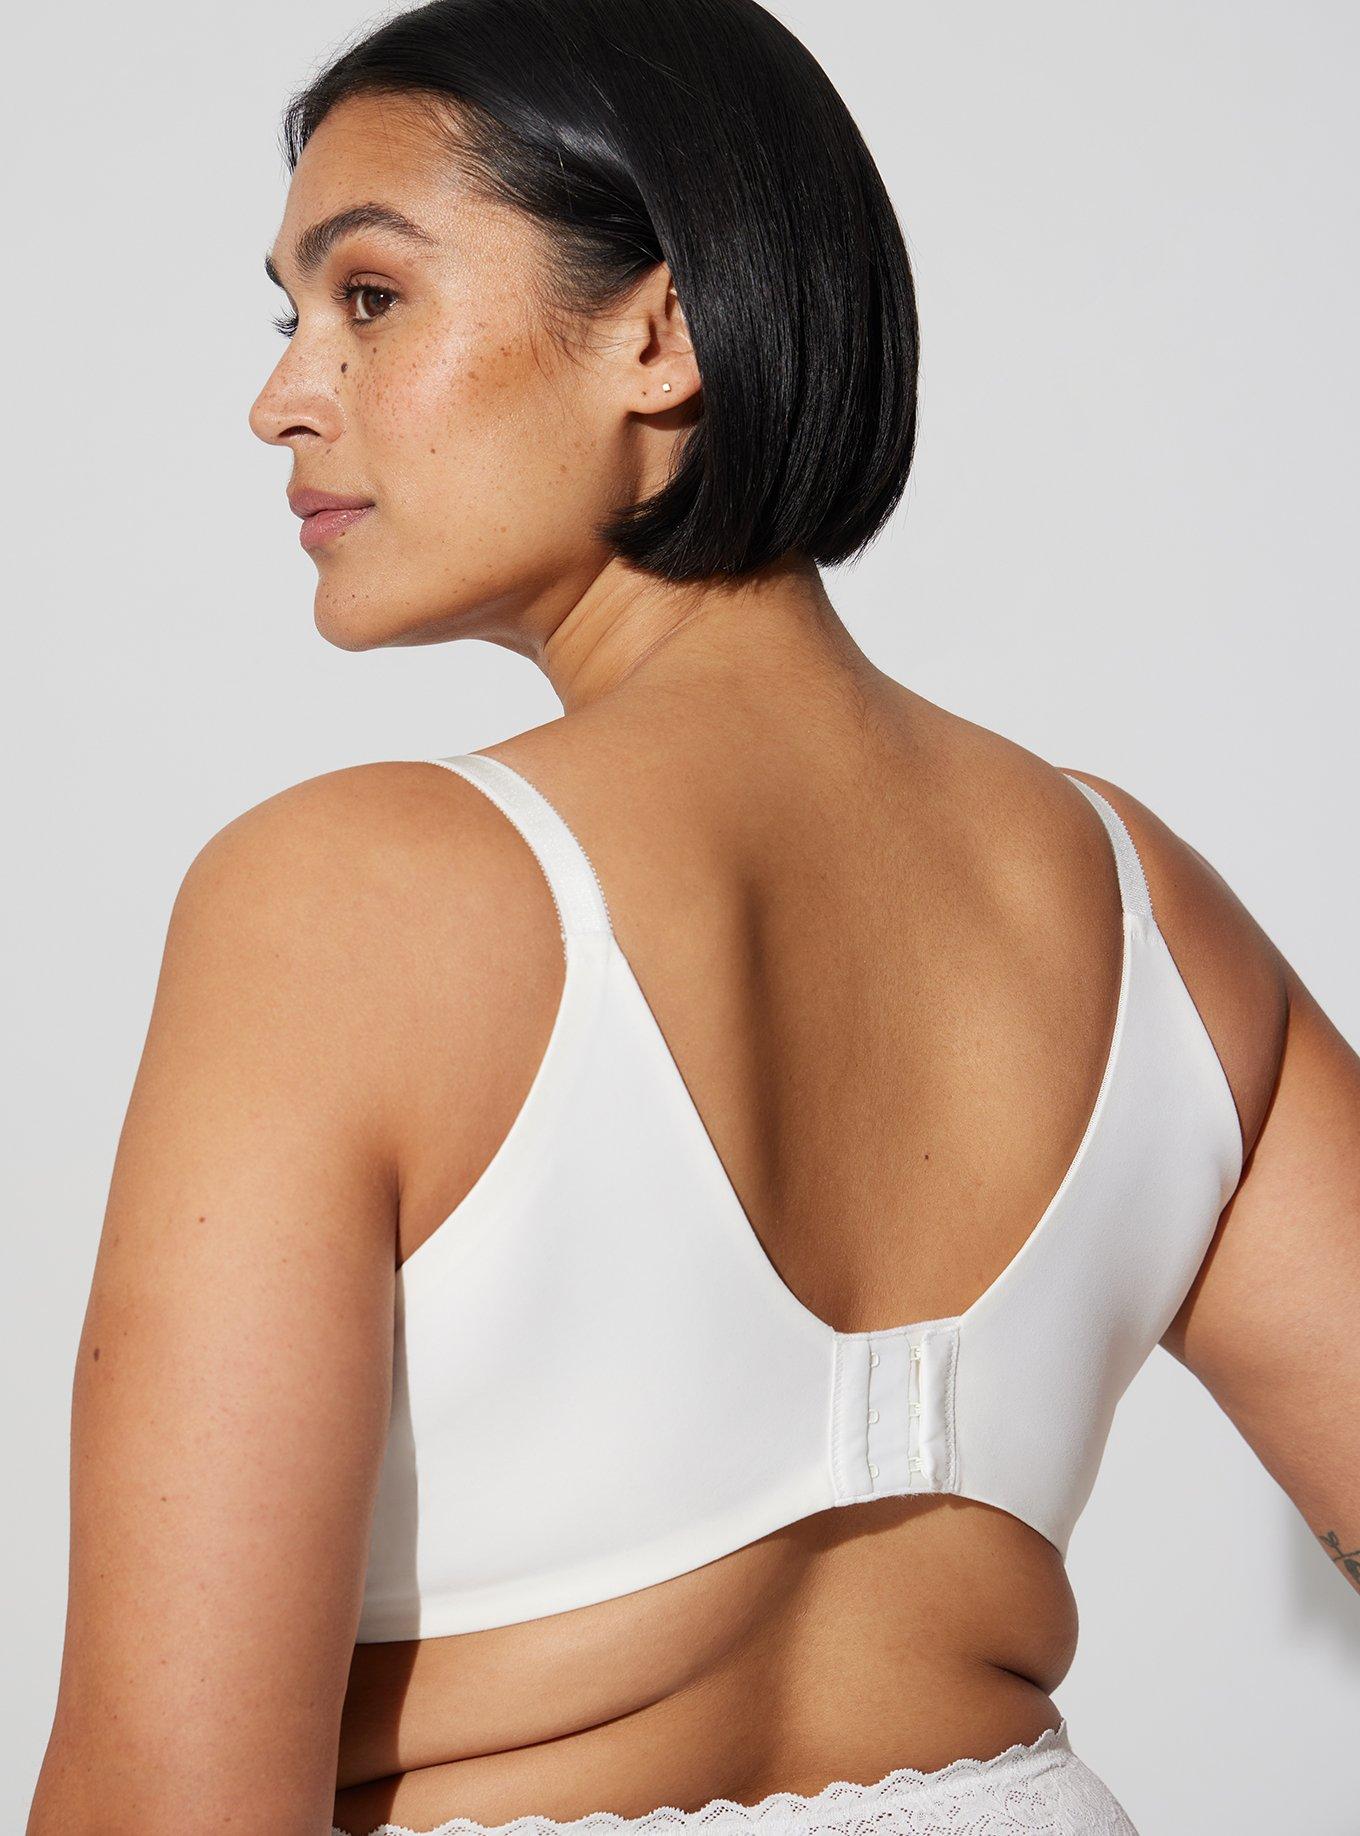 Torrid - Meet the Everyday Wire-Free Bra. The most comfortable bra EVER.  Goodbye, wires. Hello, support. Shop Wire-Free